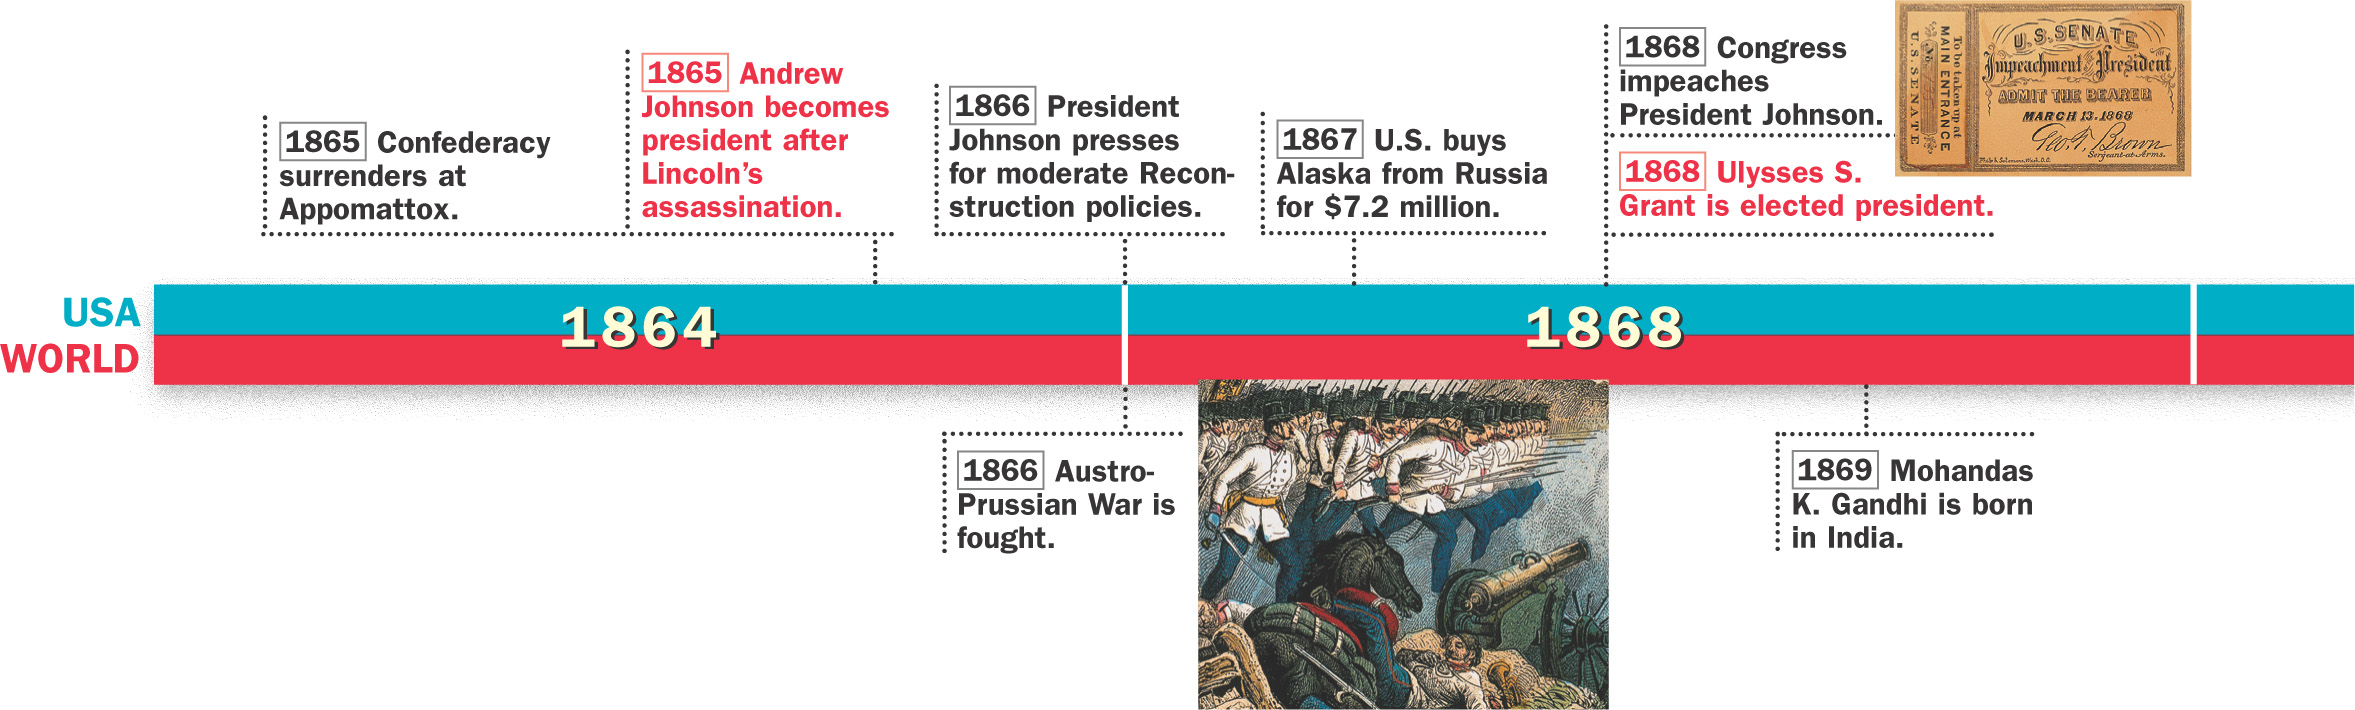 A timeline of historical events from 1864 to 1877 in both the U.S. and the world